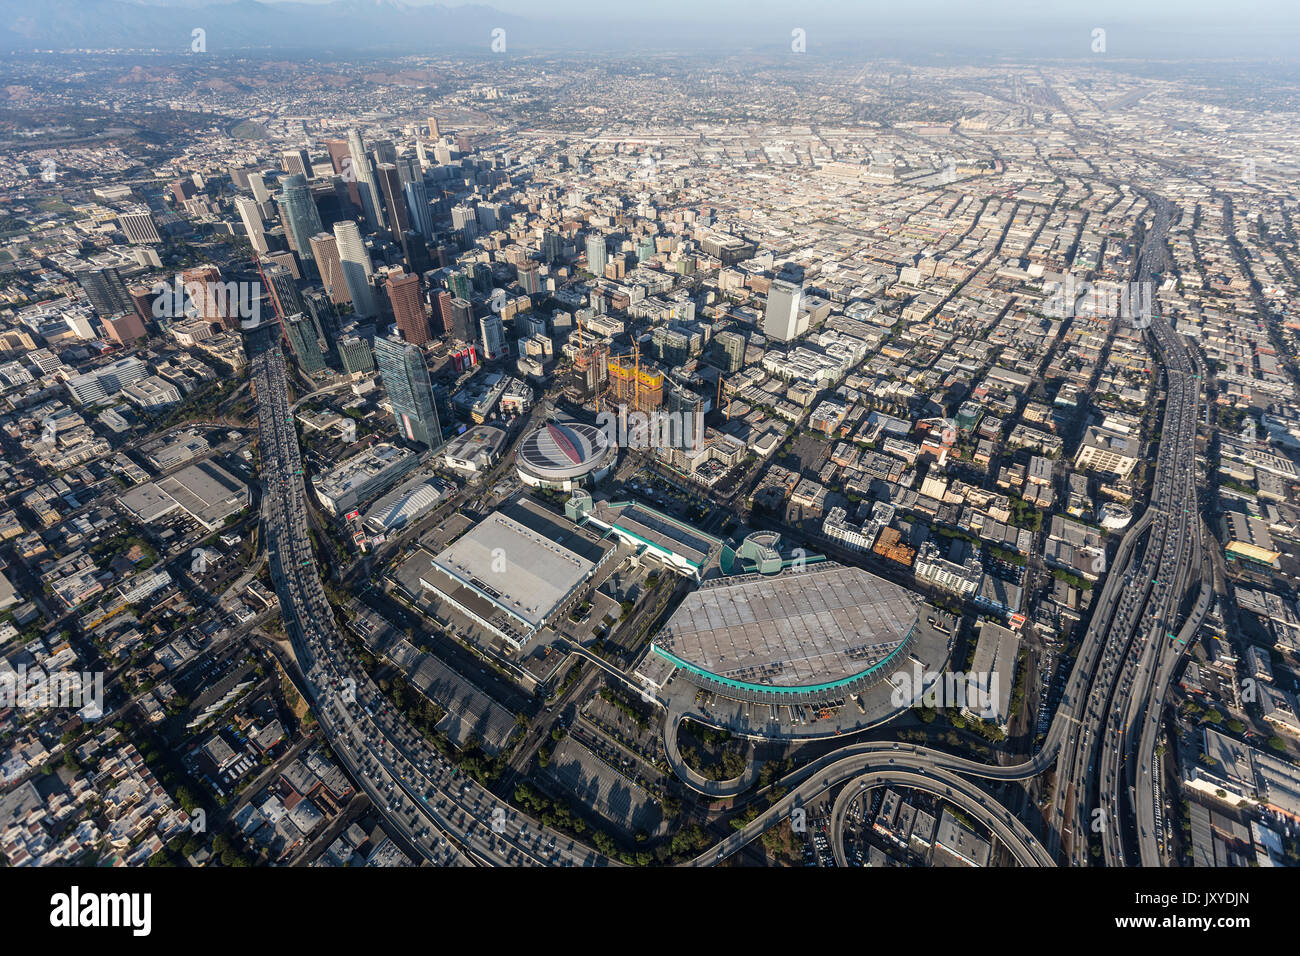 Los Angeles, California, USA - August 7, 2017:  Aerial view of Convention Center buildings, freeways and downtown towers. Stock Photo